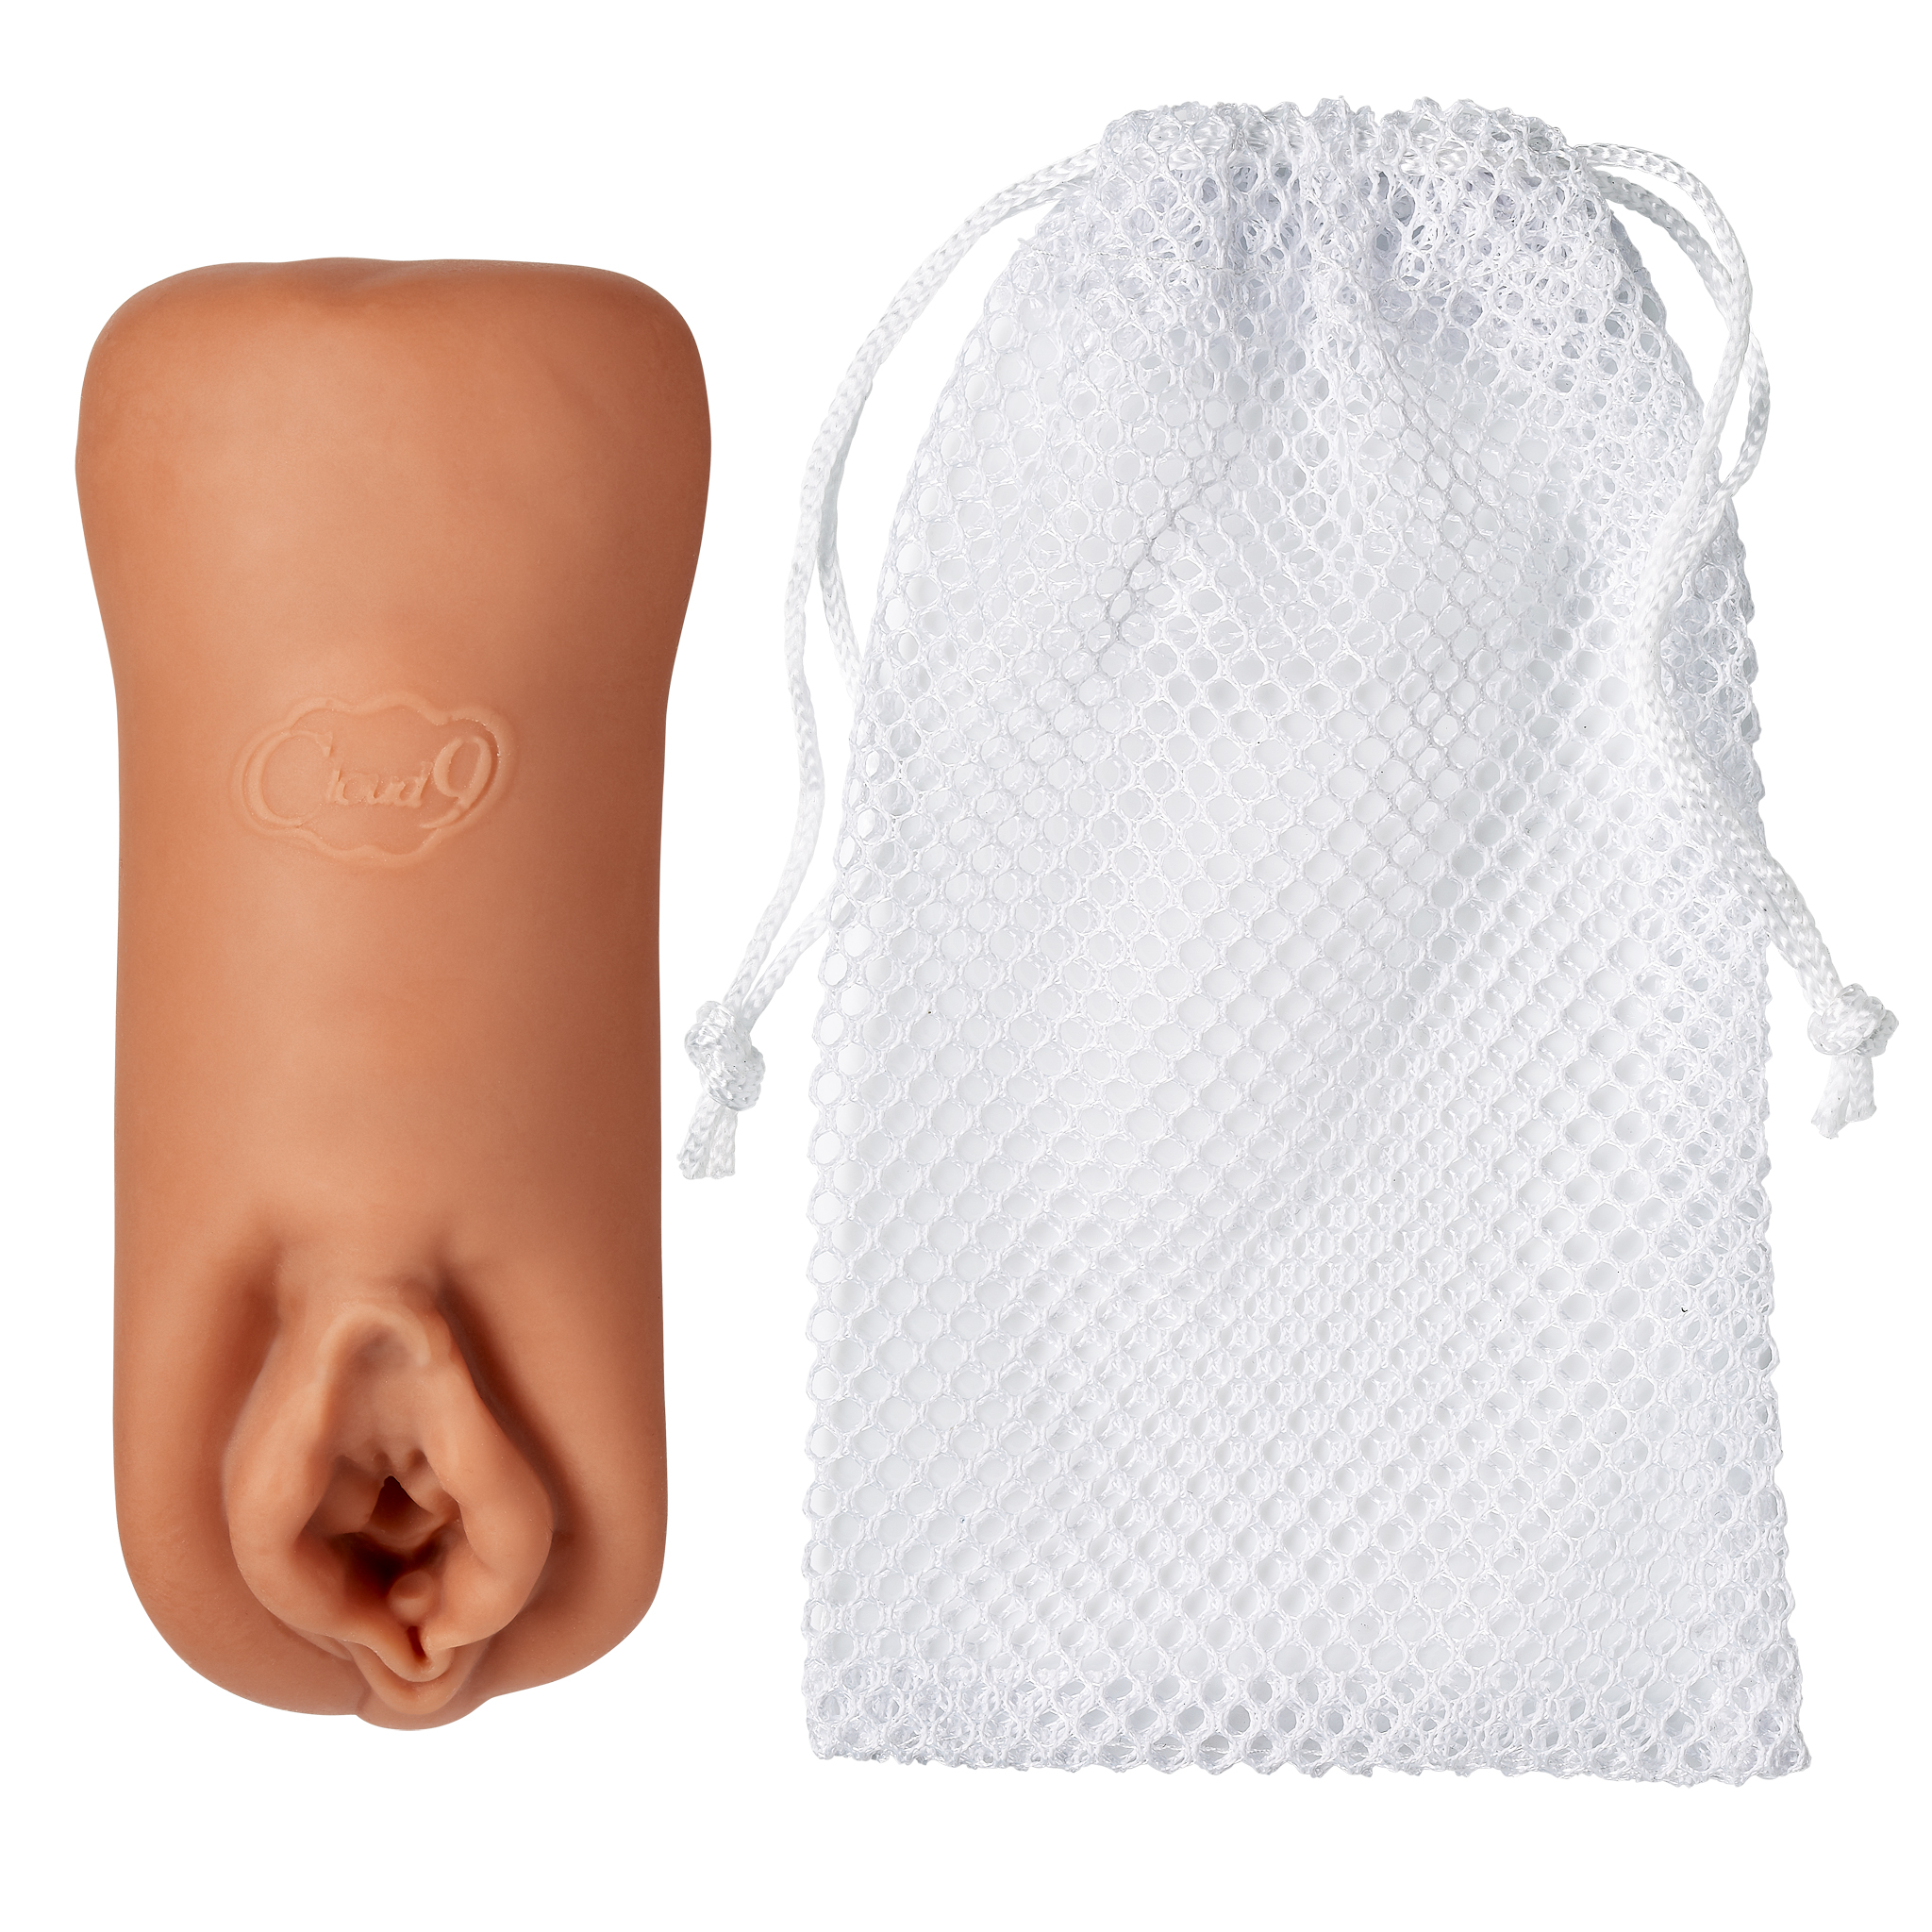 CLOUD 9 DOUBLE ENDED BEADED STROKER TAN